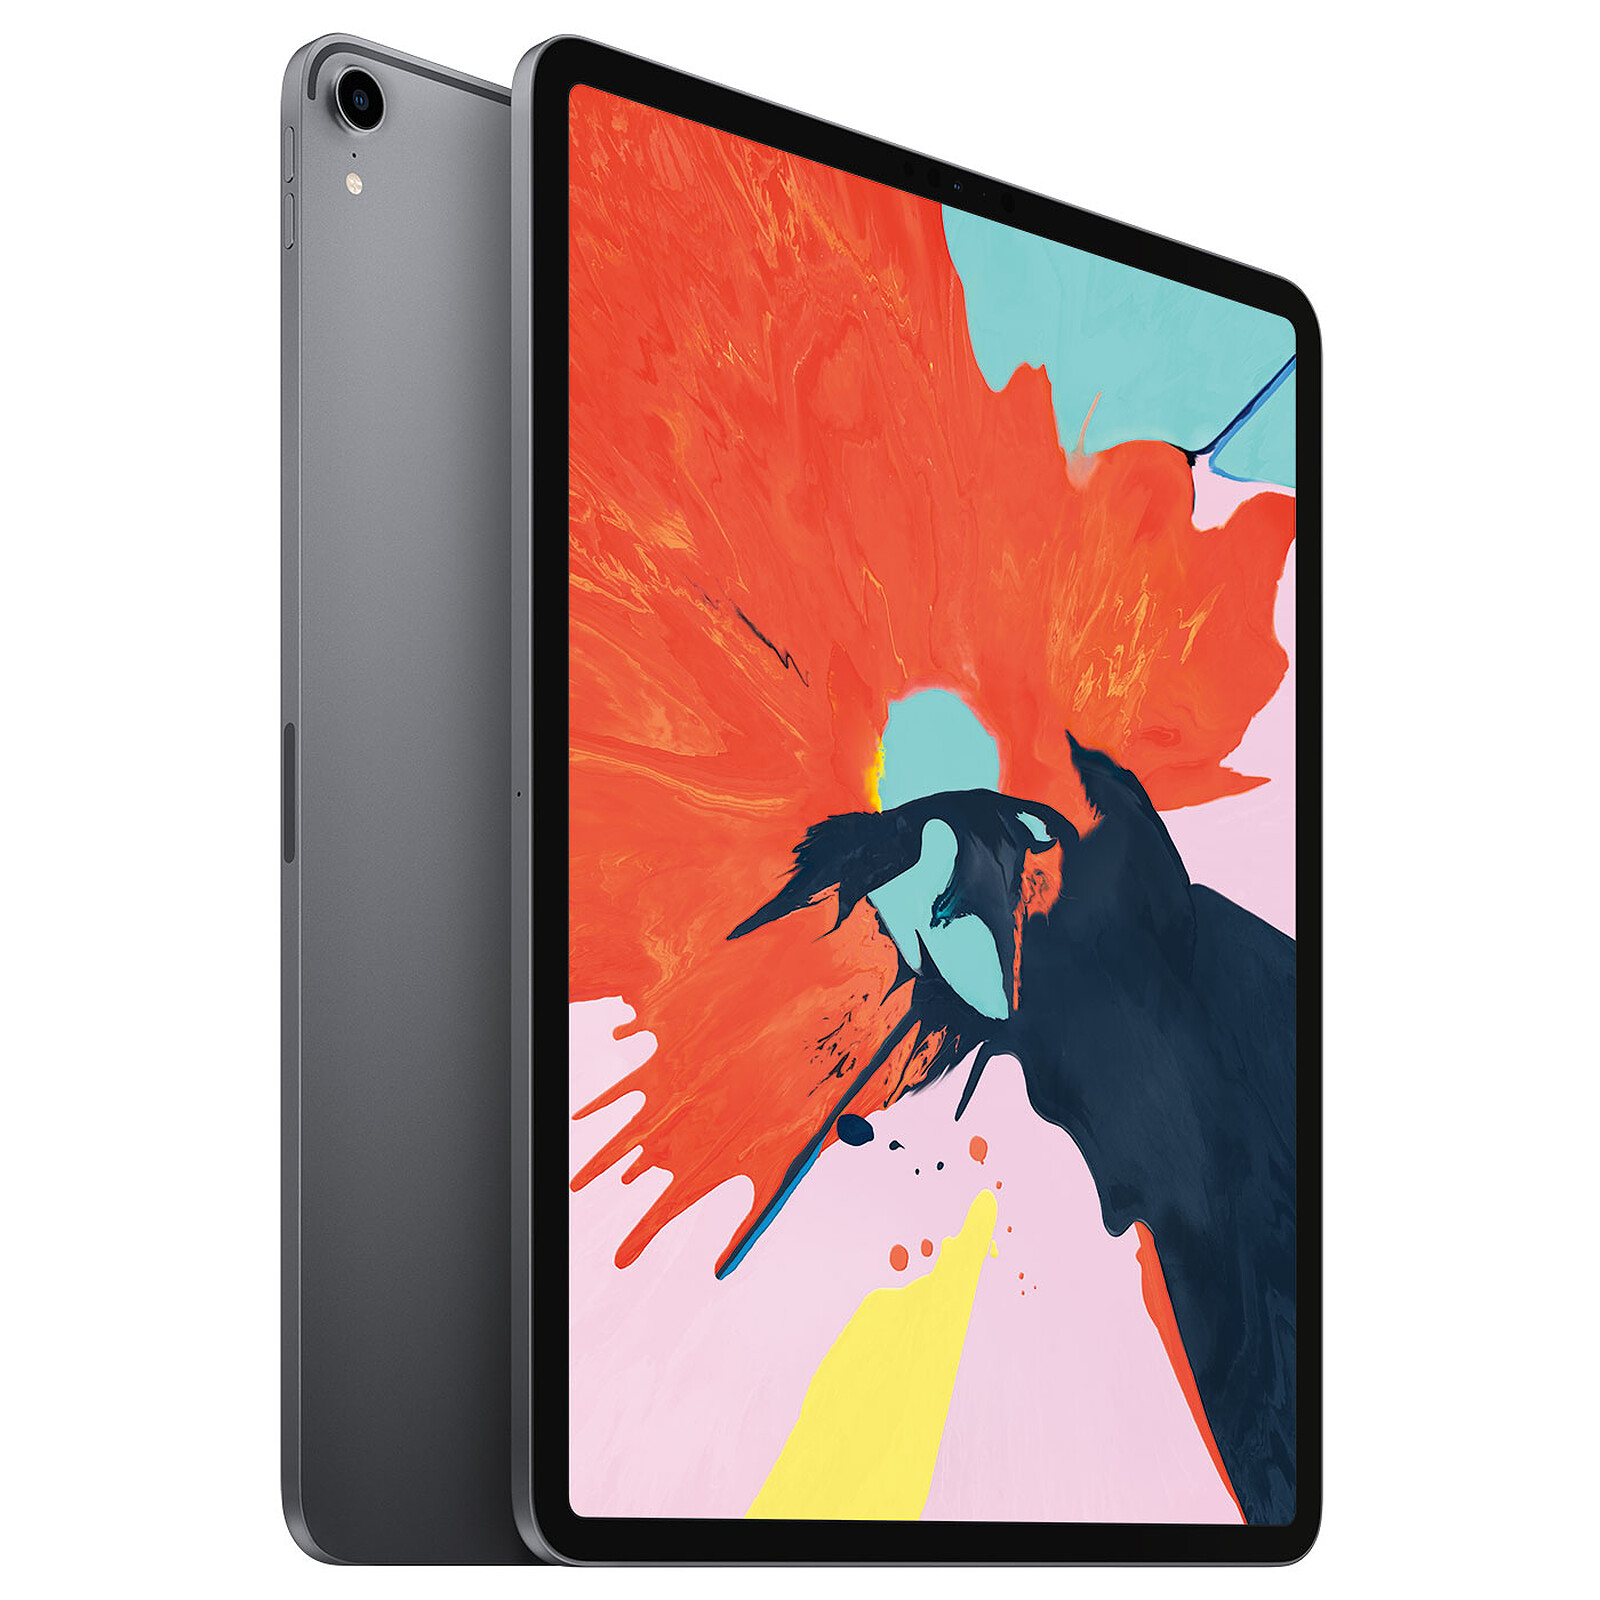 Apple iPad Pro (2018) 12.9 inch 256GB Wi-Fi Space Grey - Tablet computer  Apple on LDLC | Holy Moley